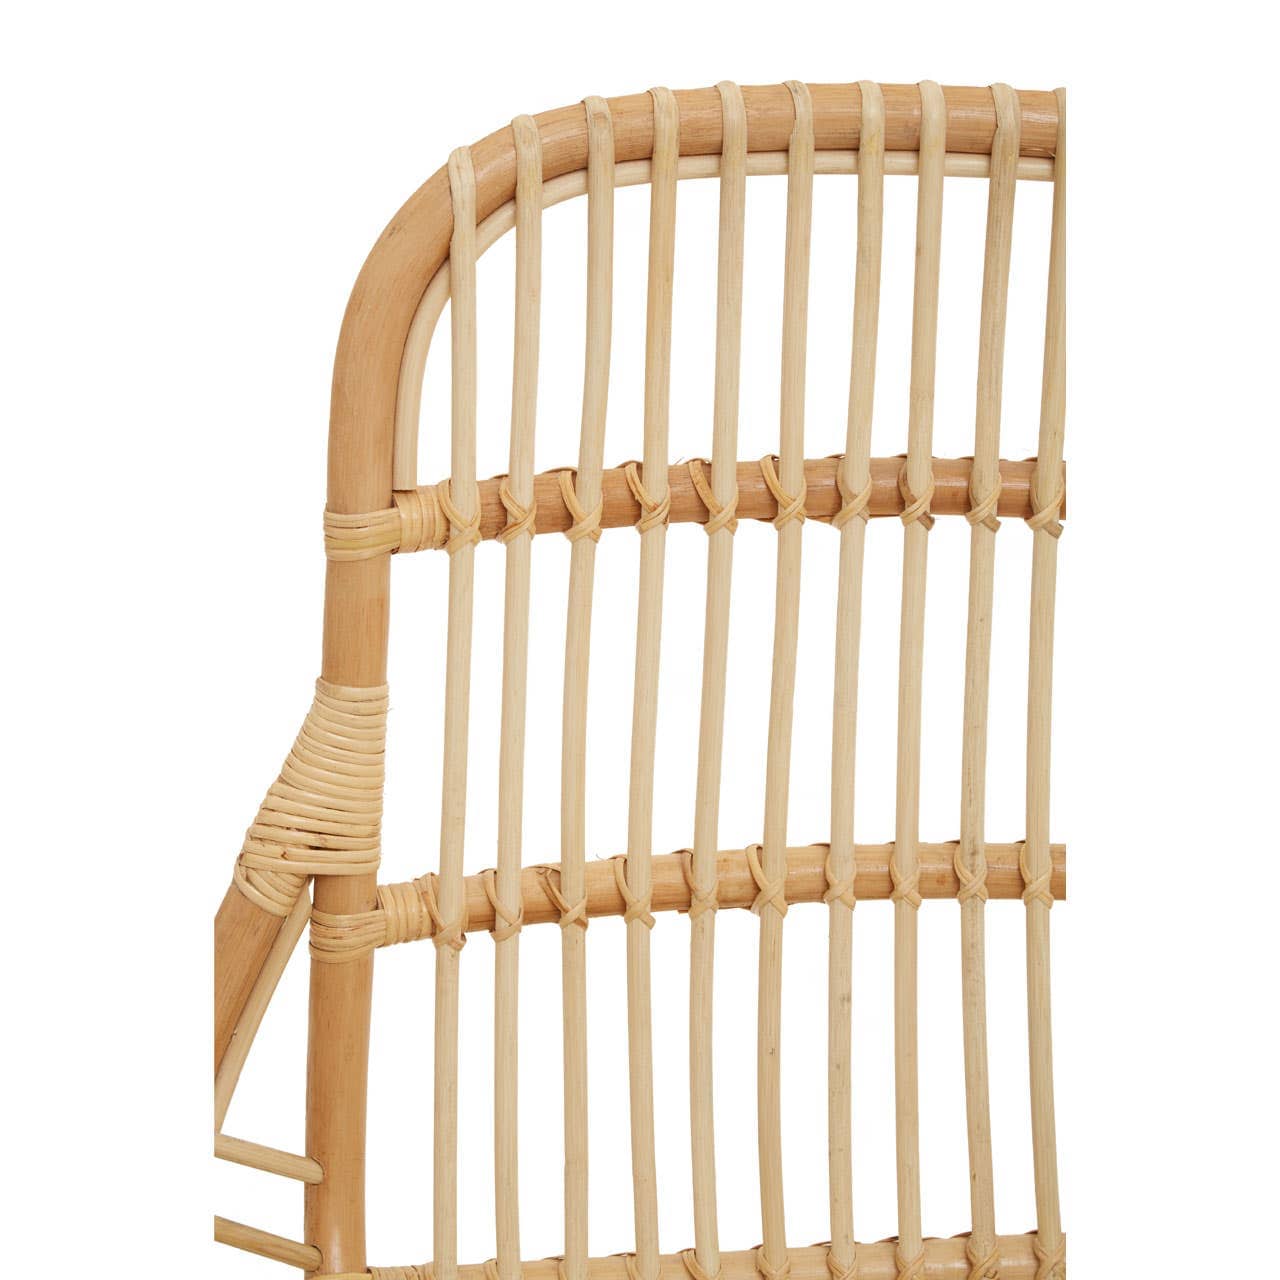 Noosa & Co. Living Manado Relax Natural Rattan Chair House of Isabella UK